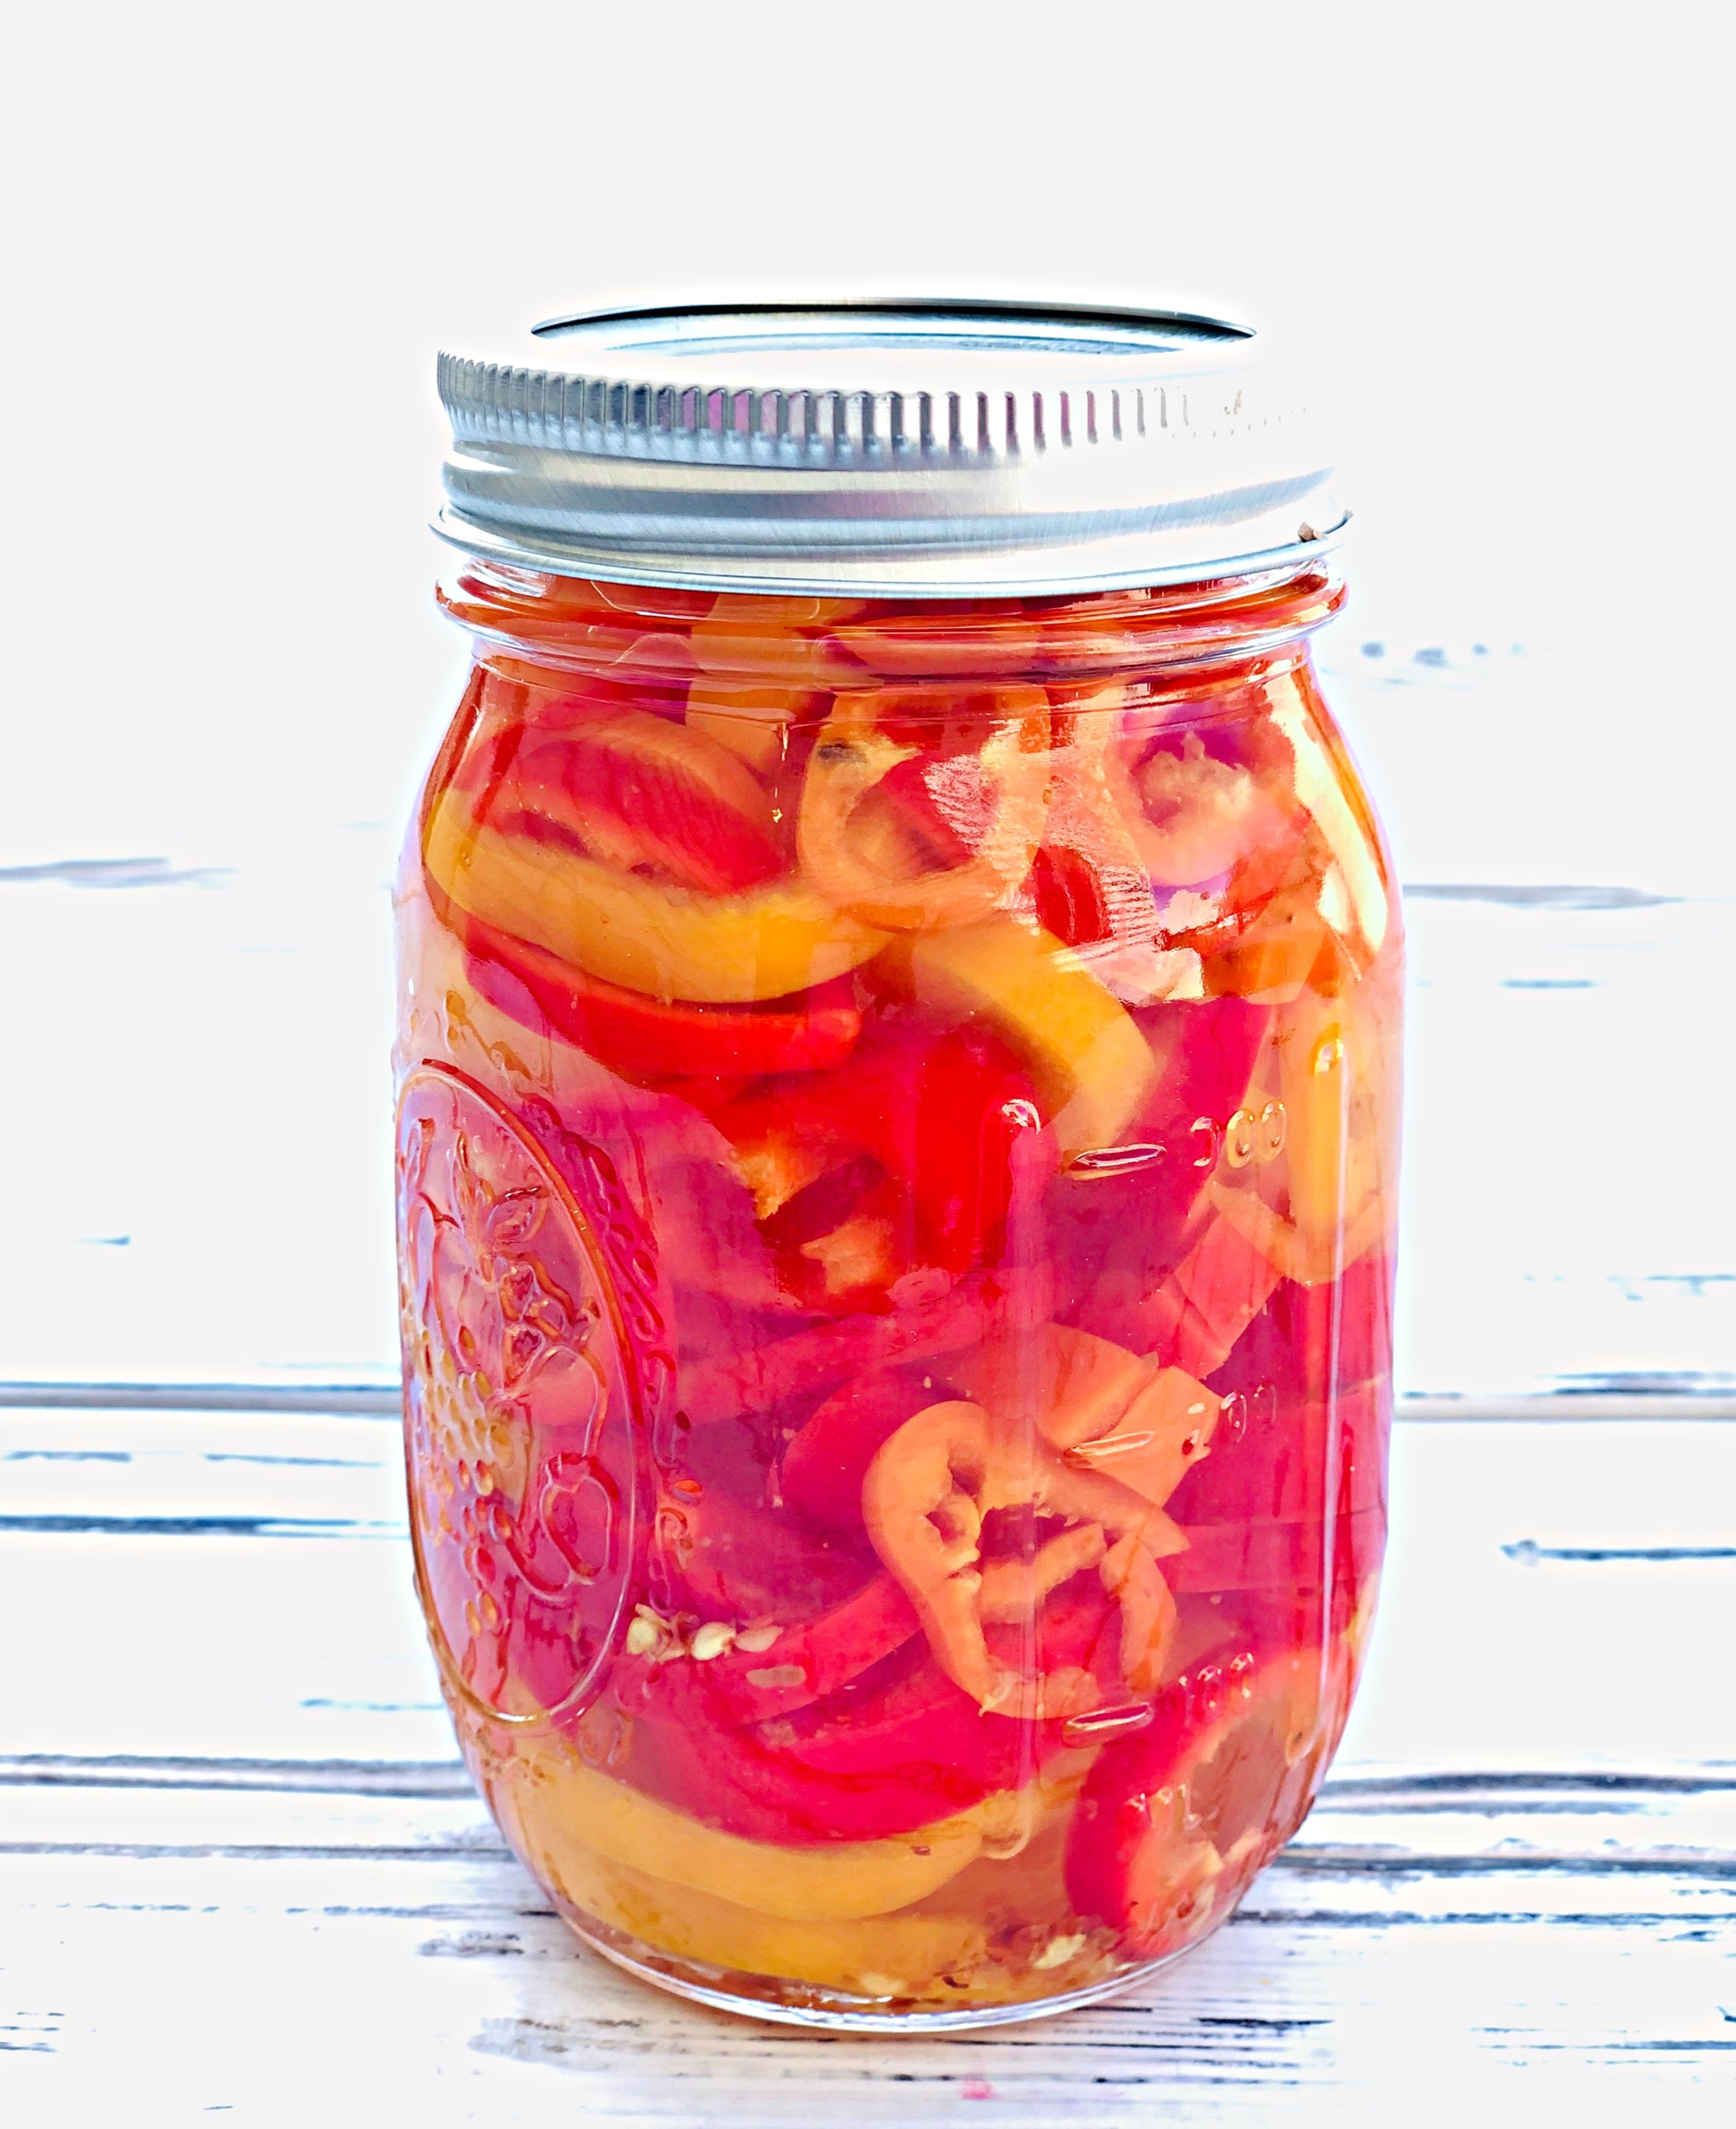 Sweet and Spicy Pickled Mini Peppers

A quick and easy recipe for pickling peppers!

#howtopicklepeppers #canningrecipes #pickledpeppers #whattodowithminipeppers #canningandpreserving #thiswifecooksrecipes via @thiswifecooks